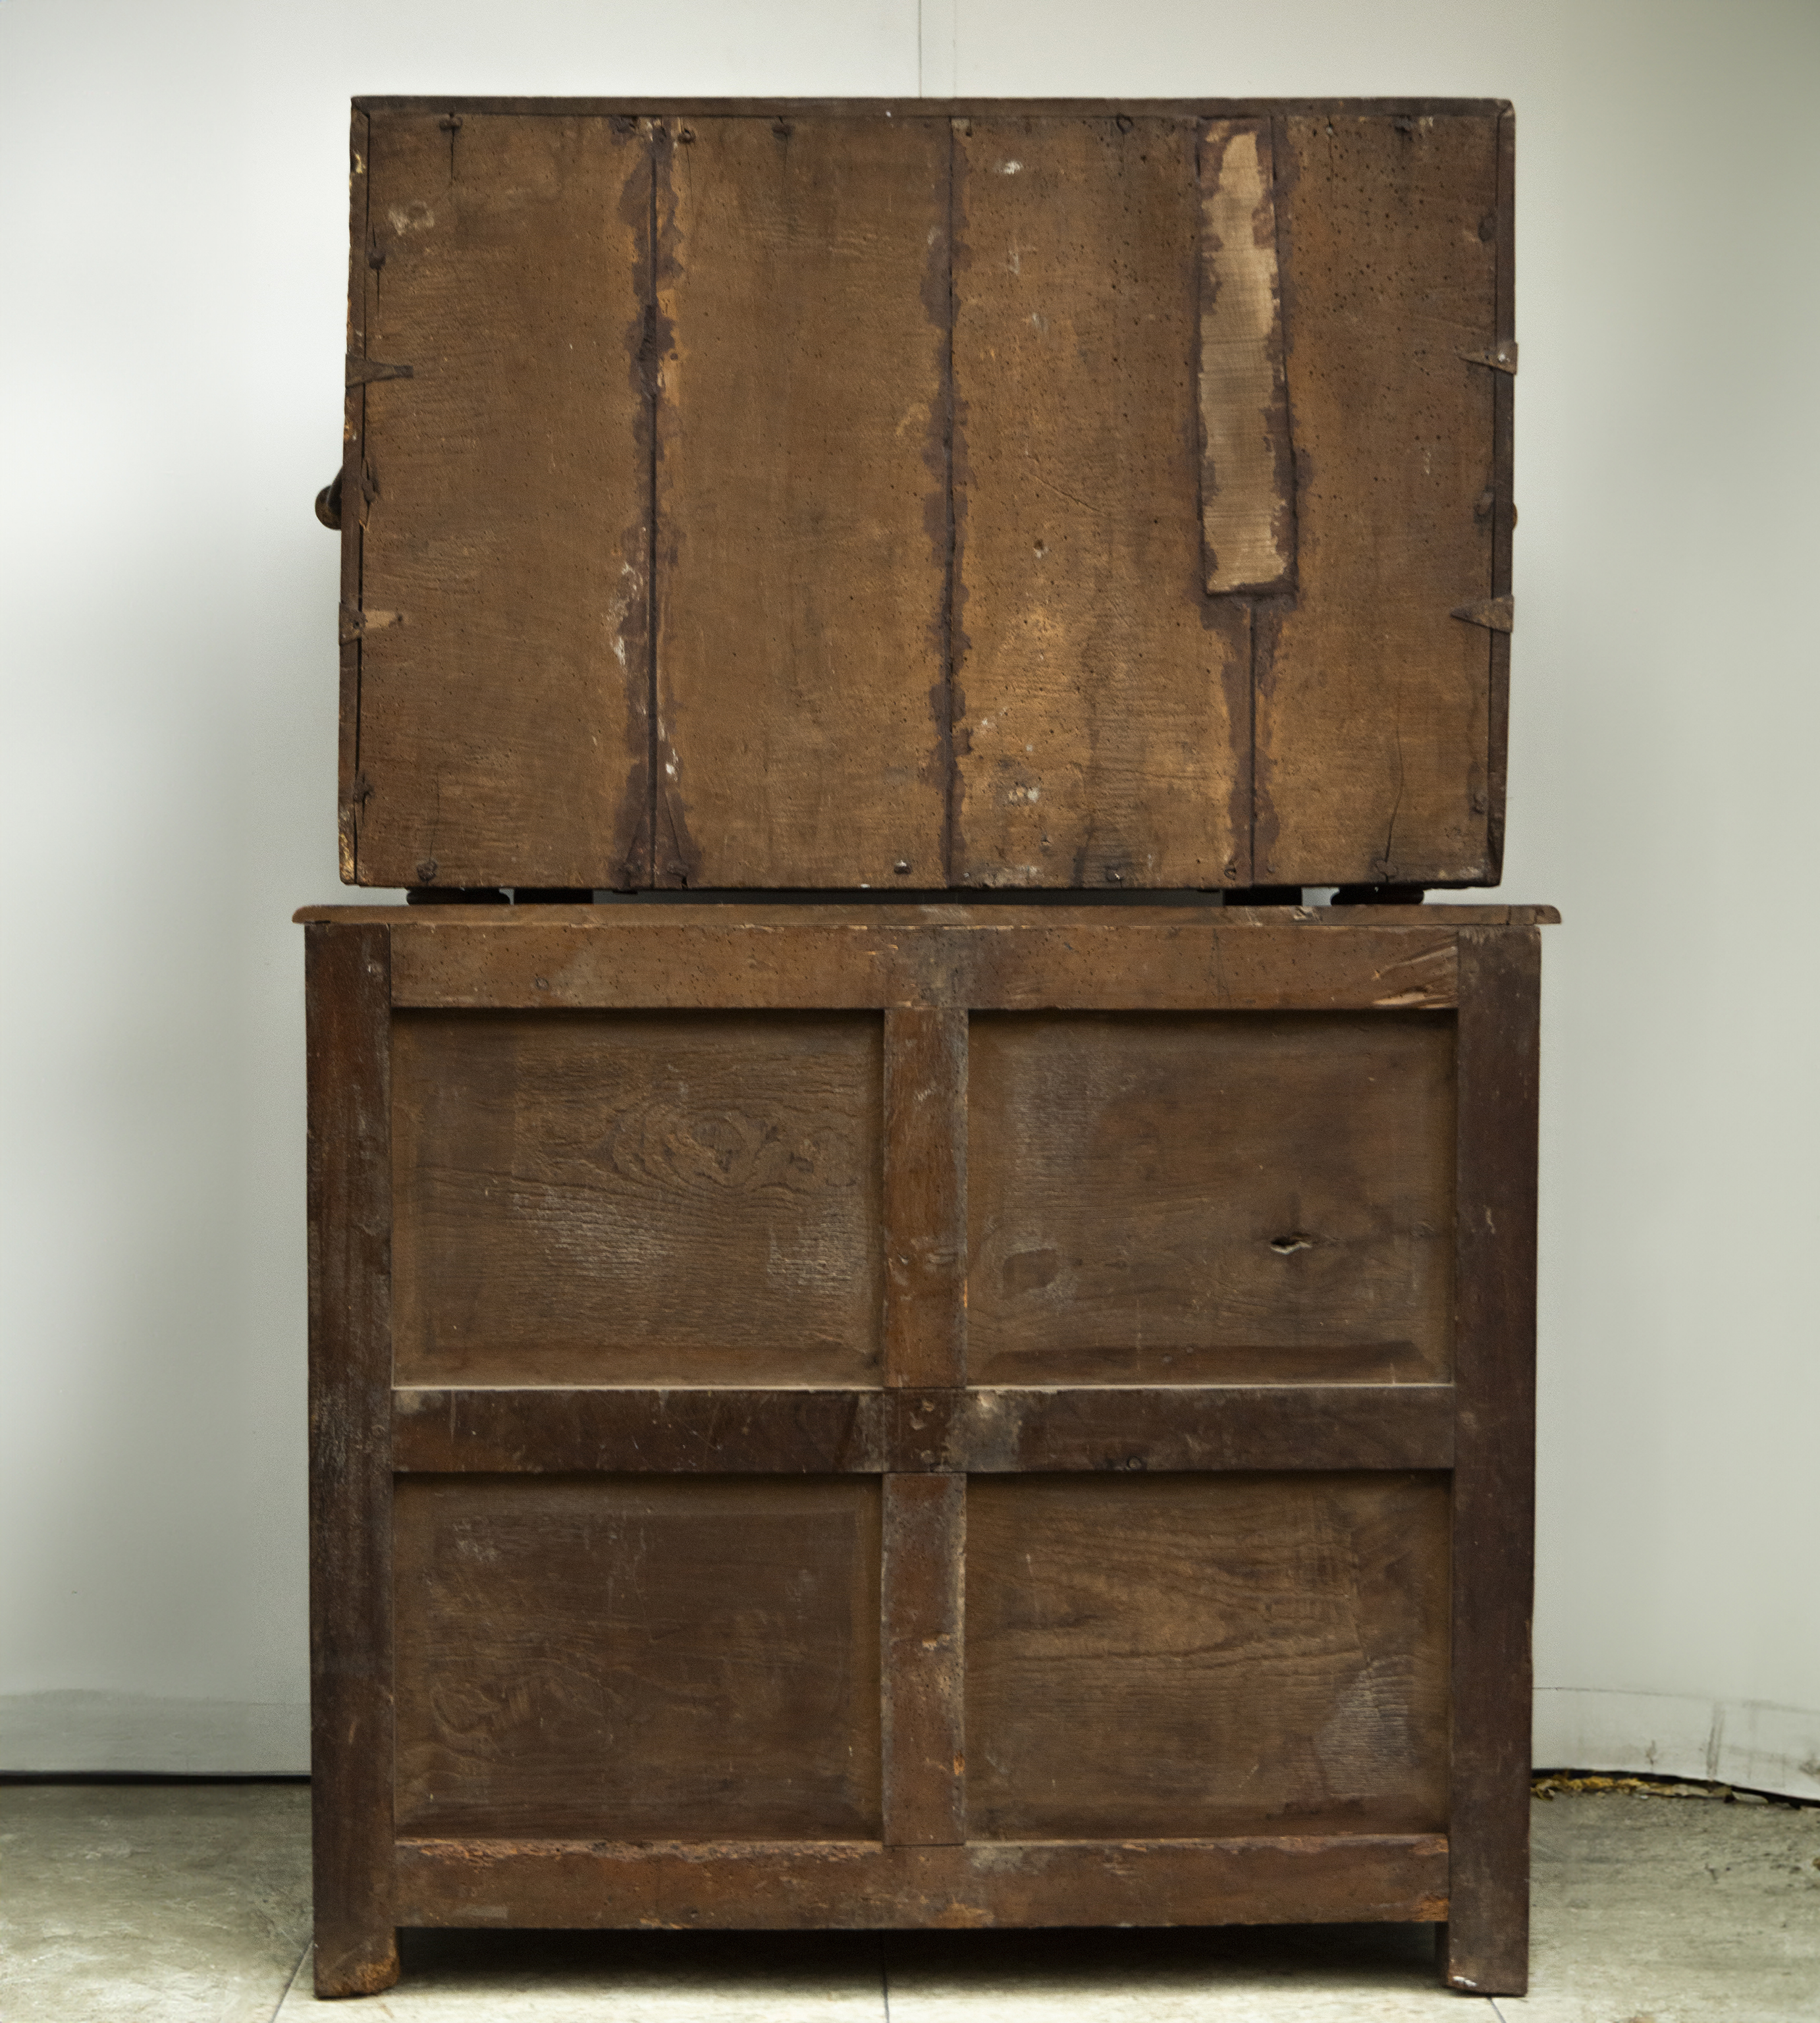 Renaissance Vargas "Bargueño" type chest cabinet with period table, 16th century - Image 8 of 8